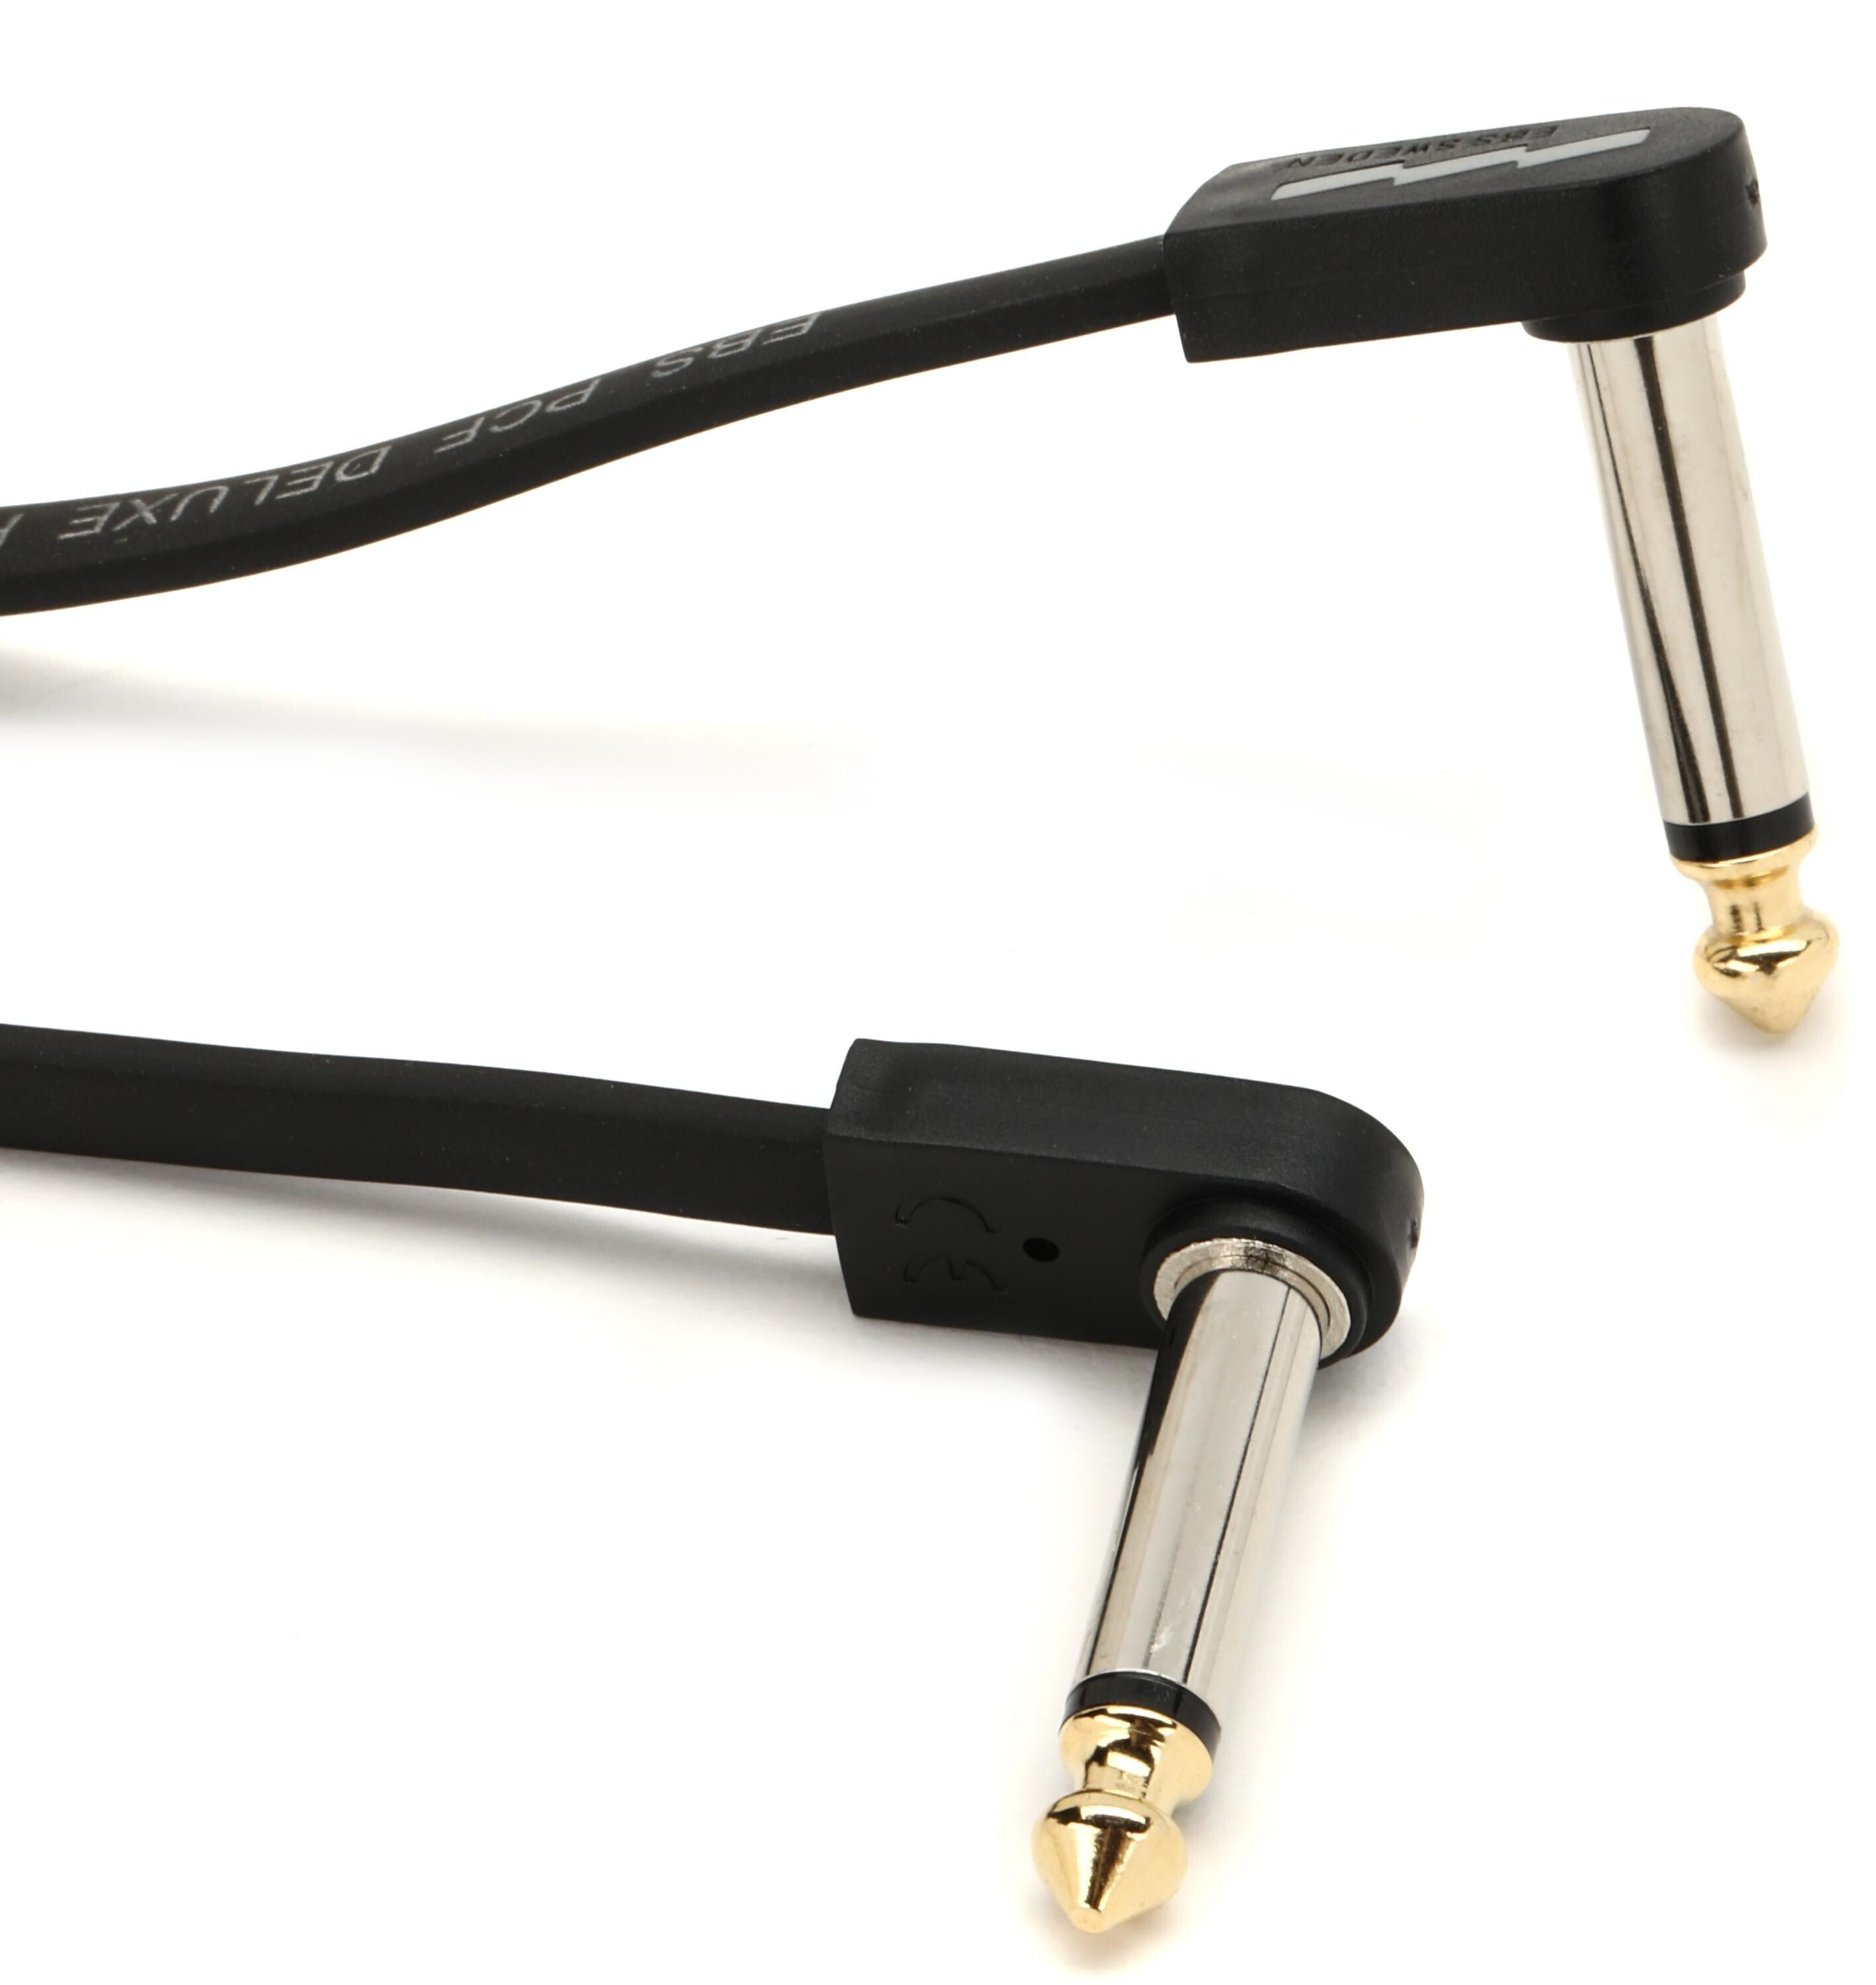 Bundled Item: EBS PCF-DL28 Deluxe Flat Patch Cable - Right Angle to Right Angle - 11.02 inch